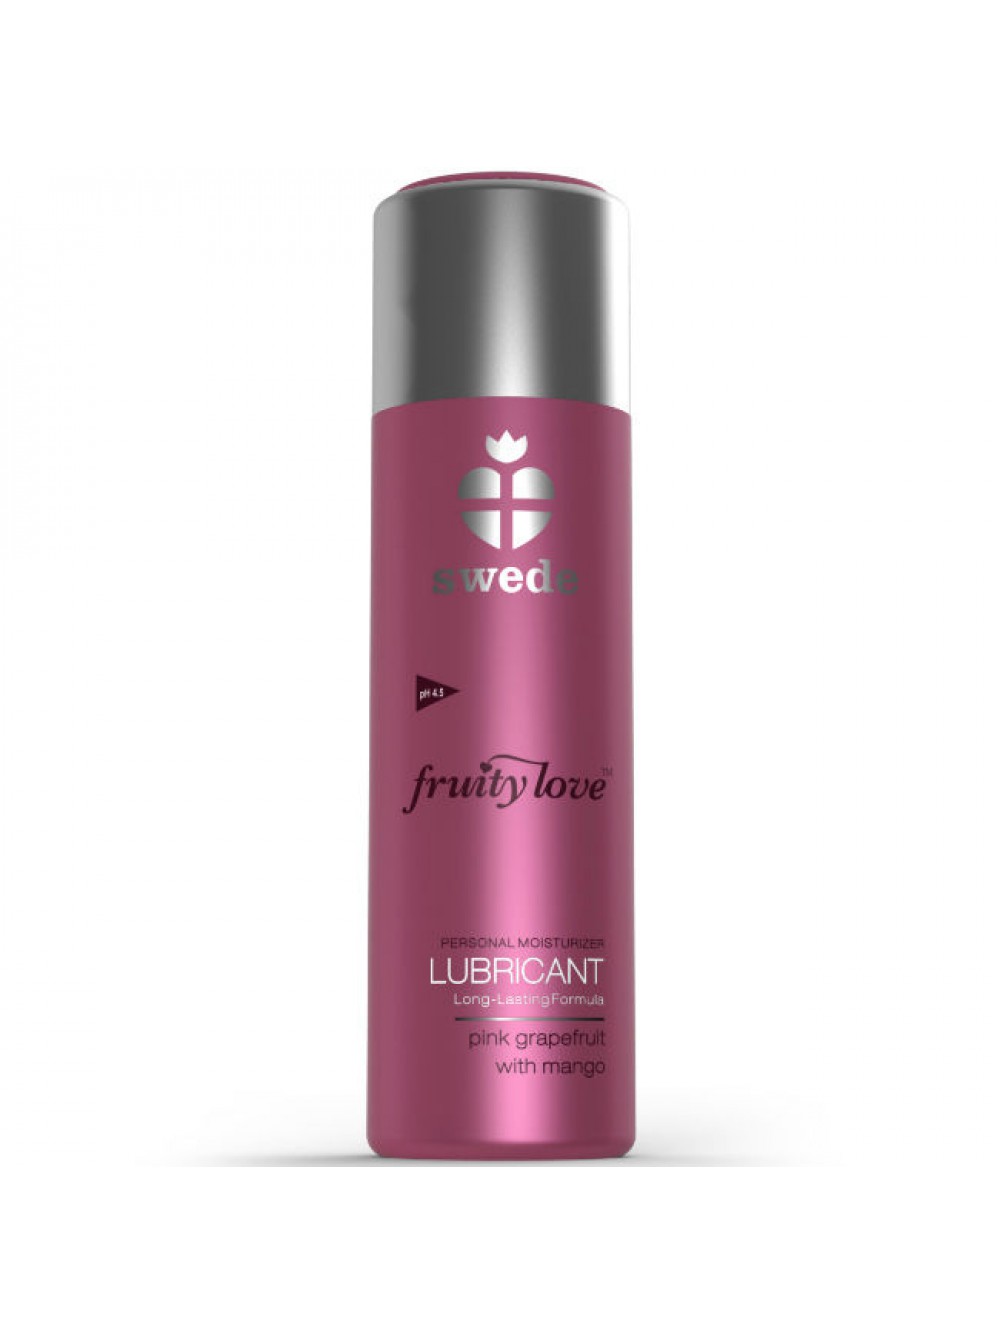 SWEDE FRUITY LOVE LUBRICANT PINK GRAPEFRUIT WITH MANGO 50 ML 7350028784615